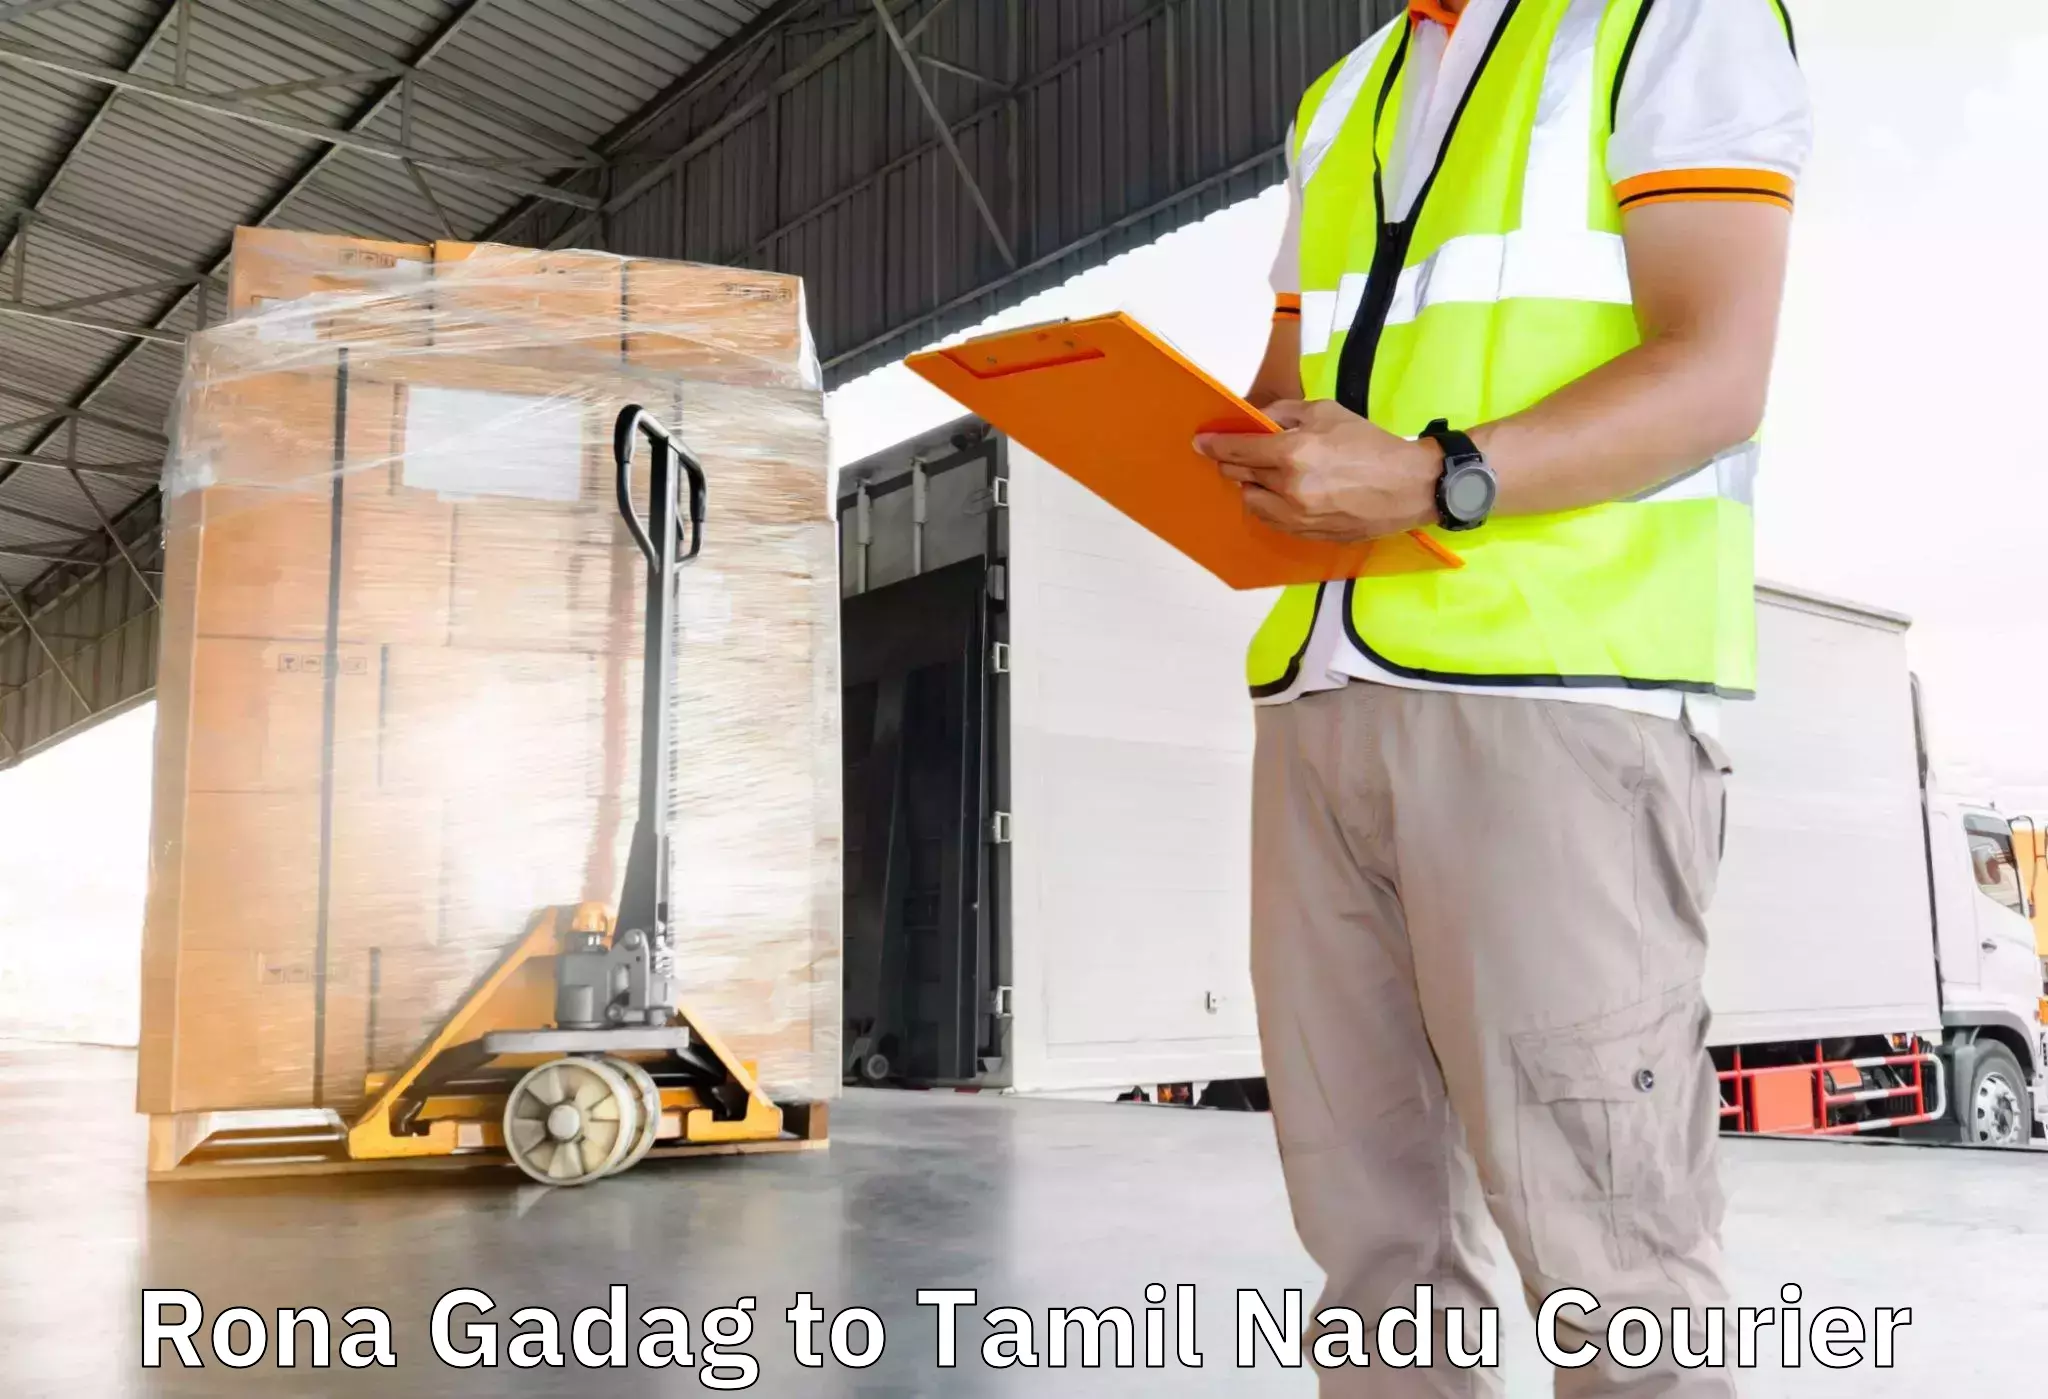 Moving and storage services in Rona Gadag to Dharmapuri